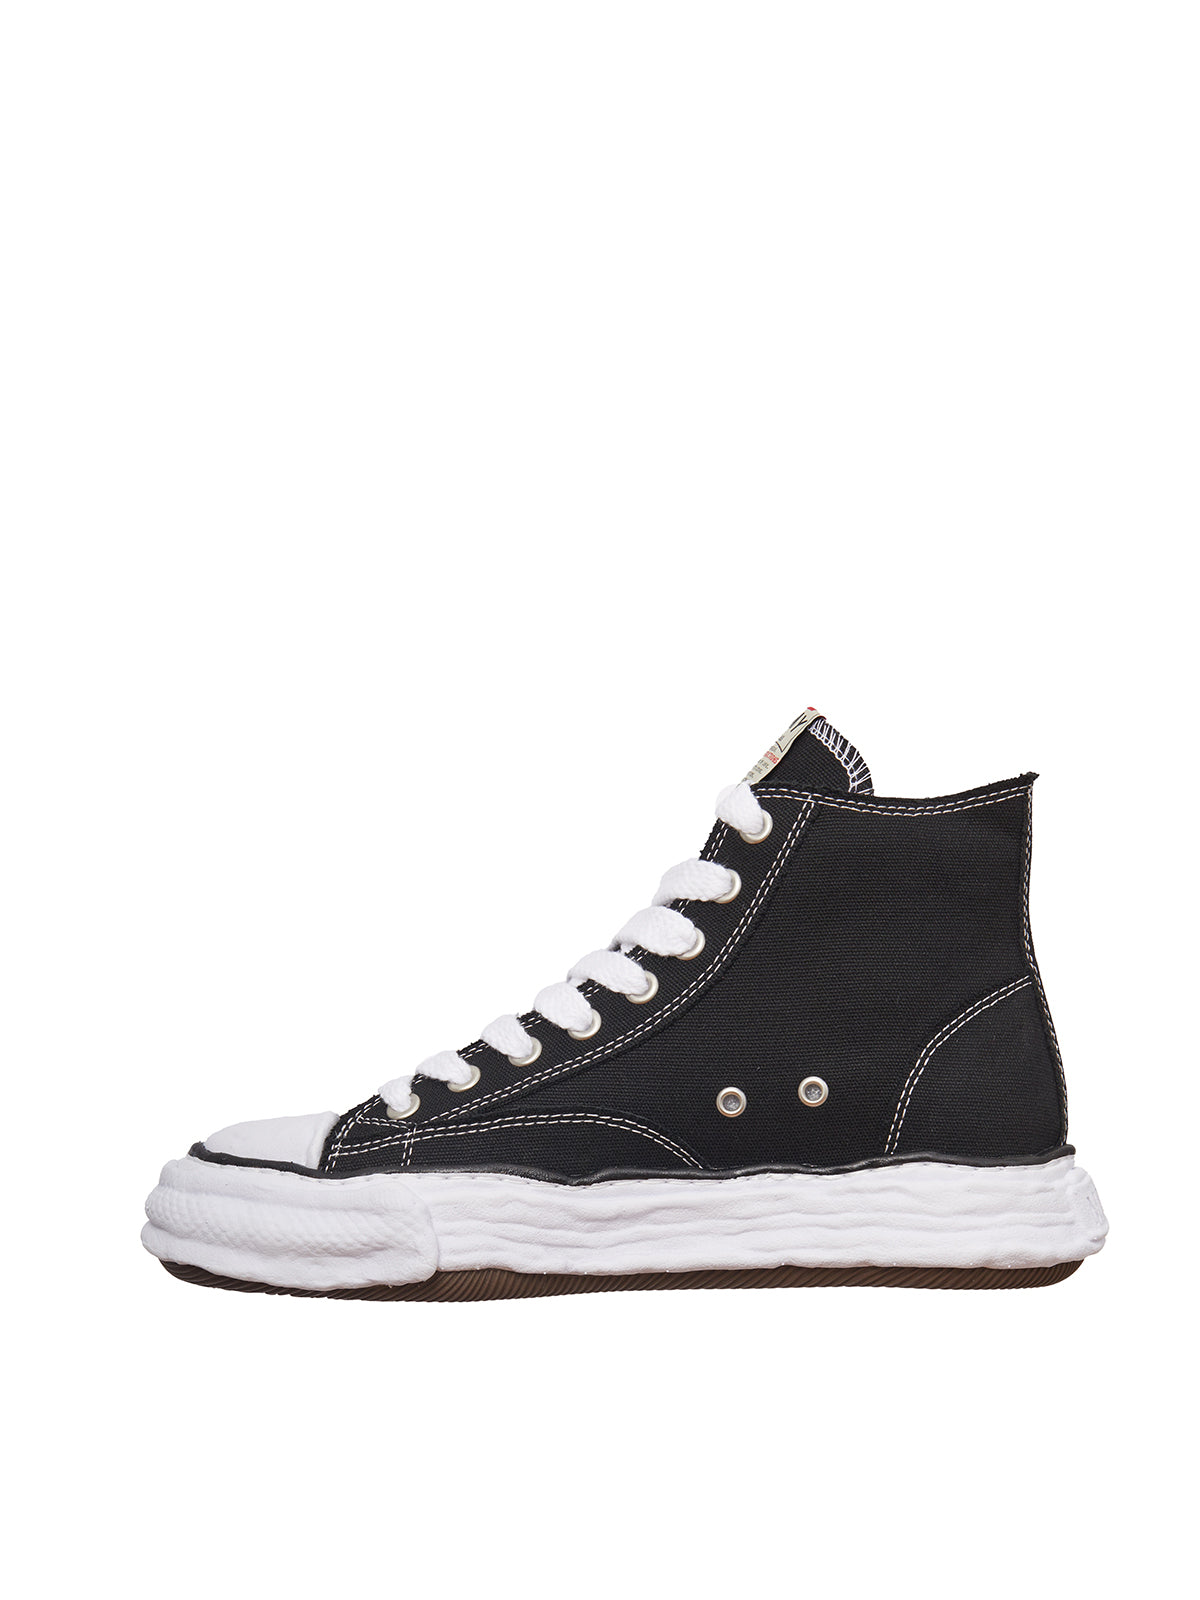 Black Leather High-Top Sneakers for Men